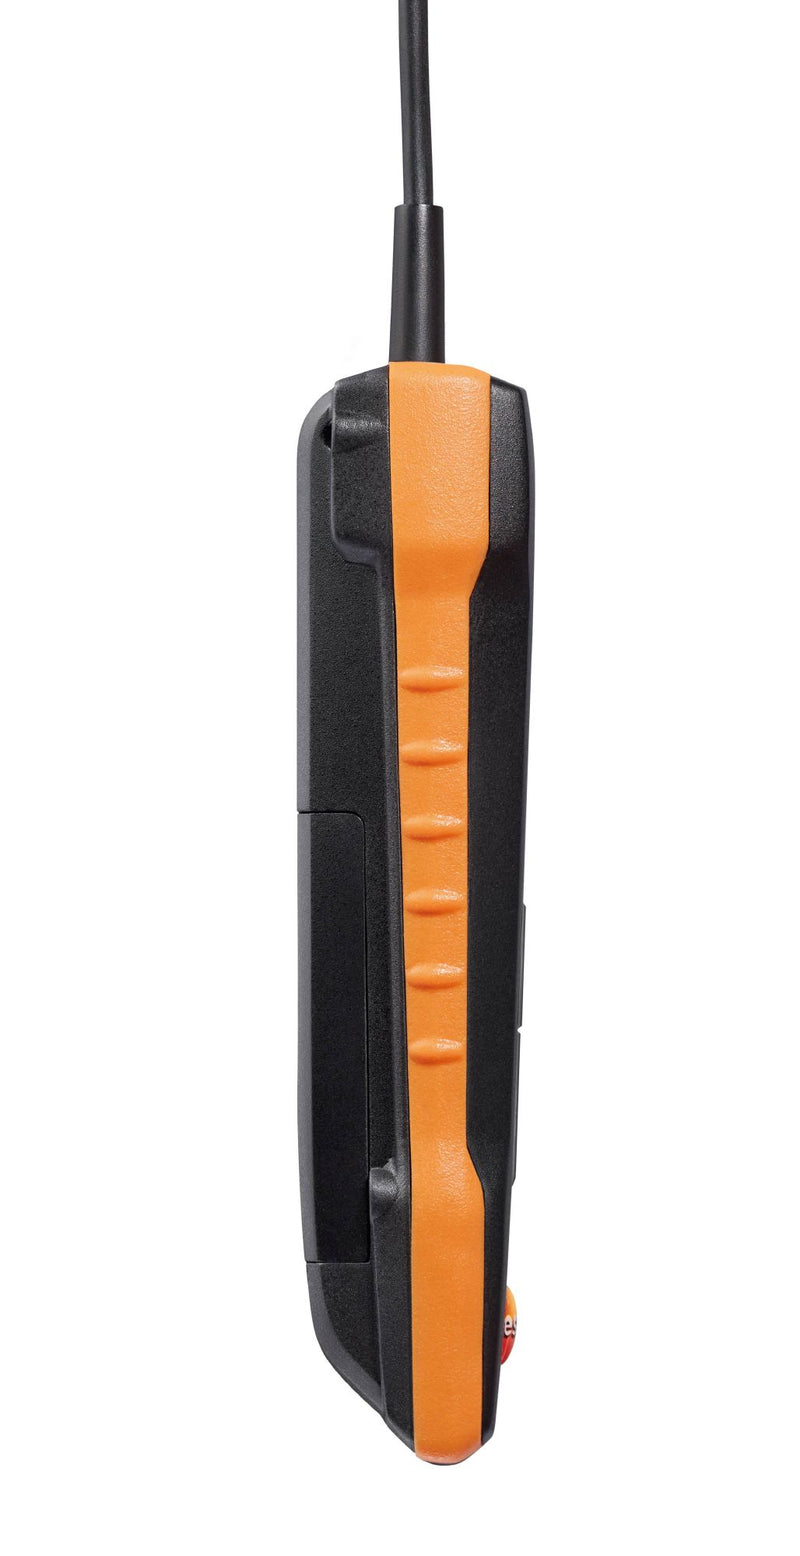 Testo 425 - Digital hot wire anemometer with App connection